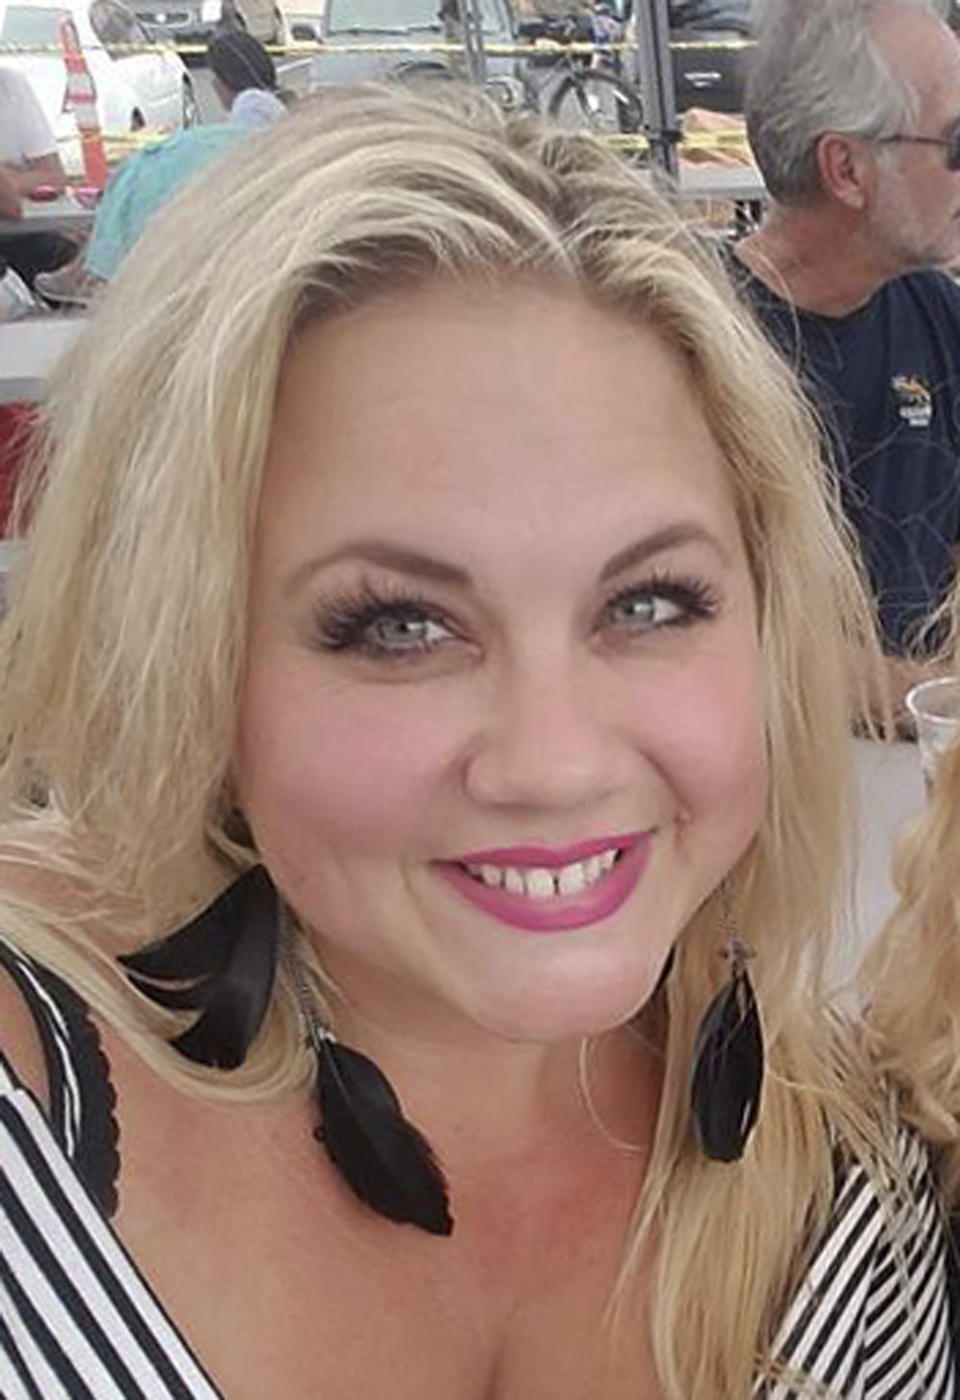 <p>This undated photo shows Heather Warino Alvarado, one of the people killed in Las Vegas after a gunman opened fire on Sunday, Oct. 1, 2017, at a country music festival. (Facebook via AP) </p>